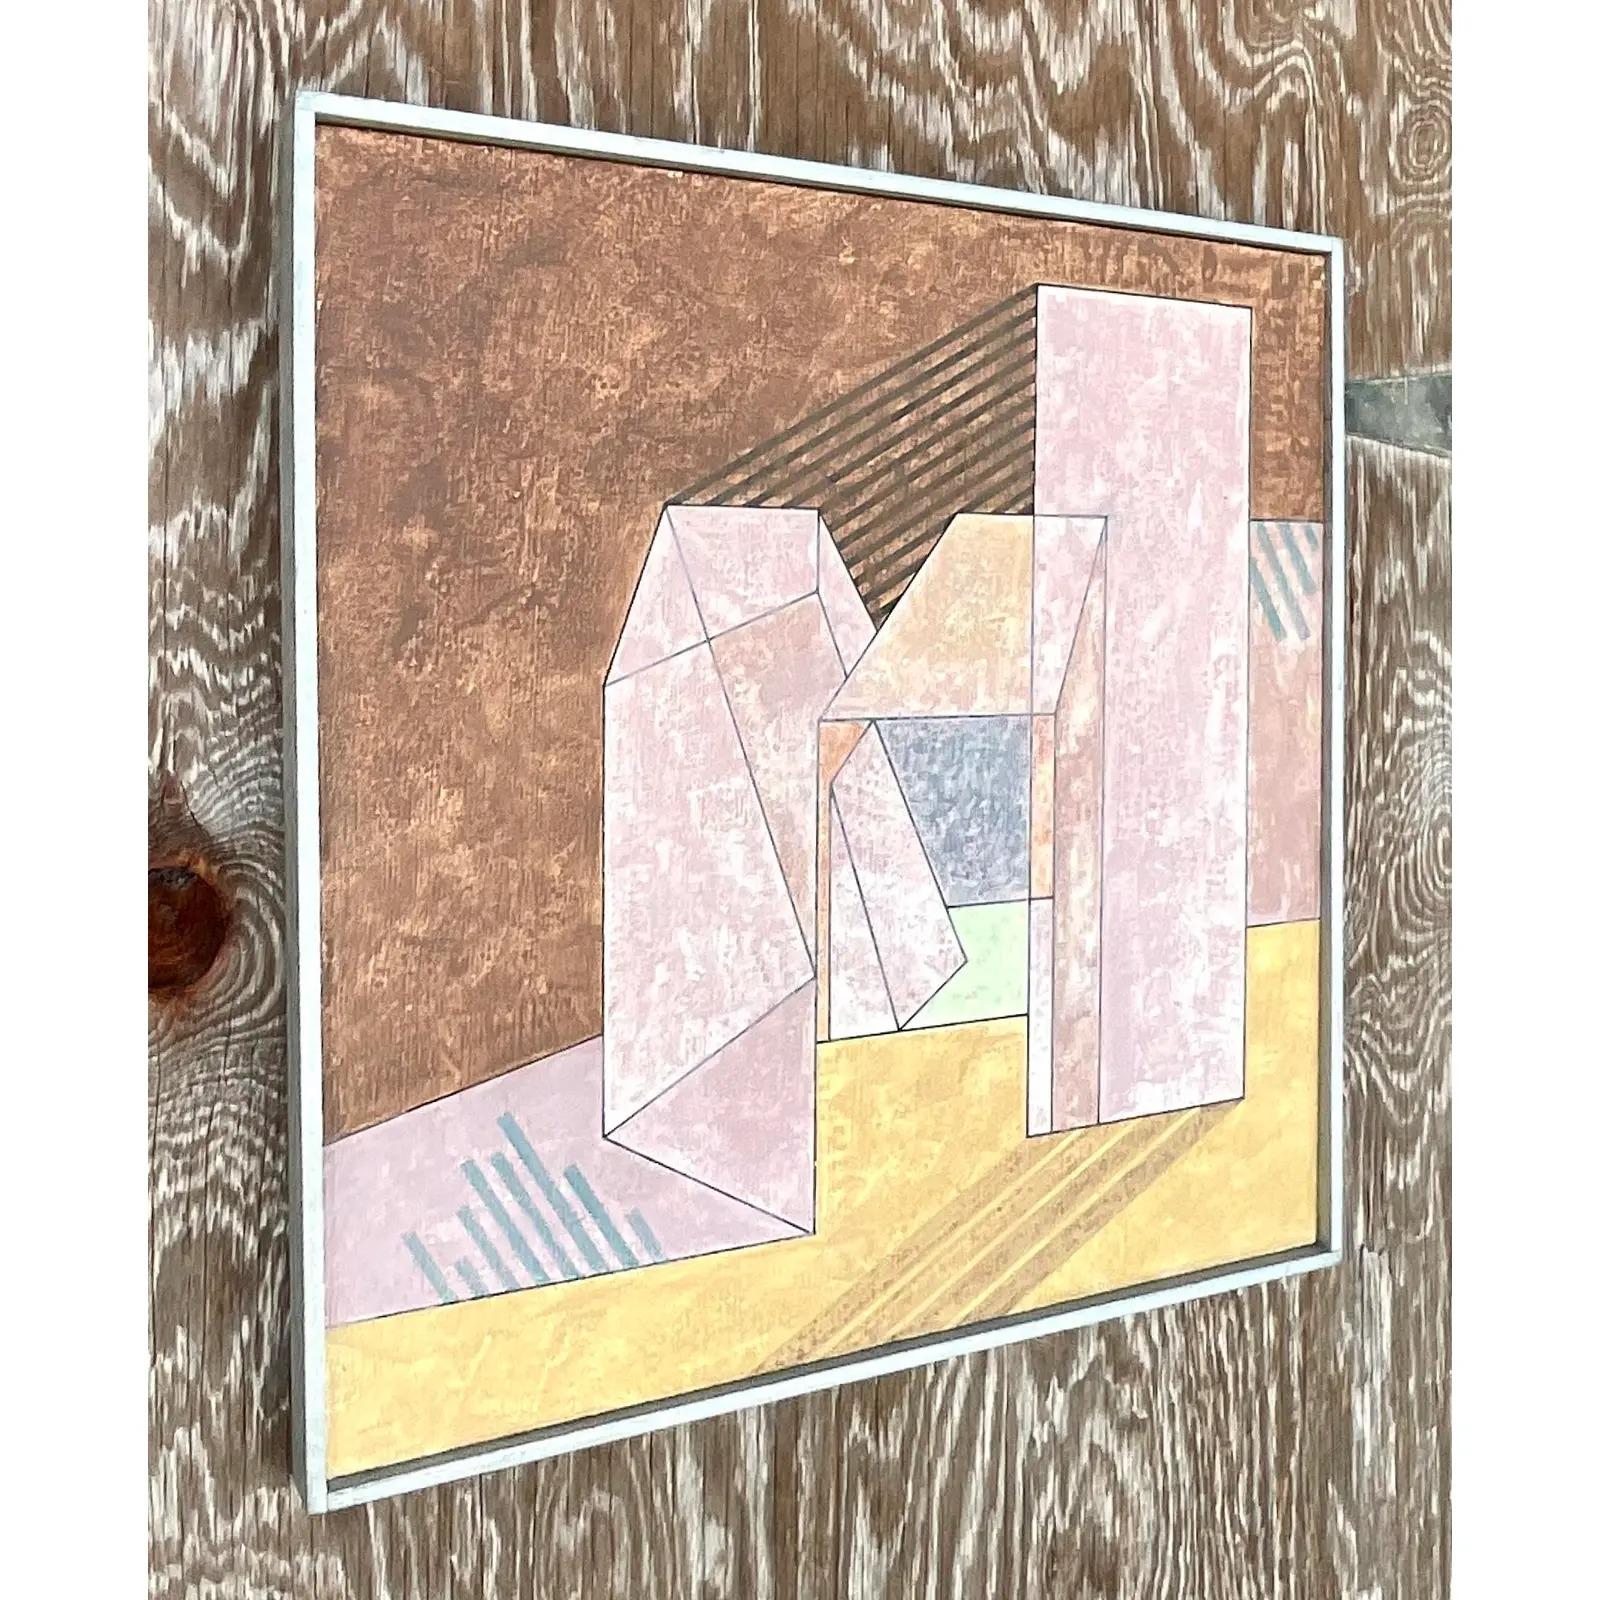 A fabulous vintage Boho original oil painting. A chic Abstract composition in clear pale colors. Done by the artist Crisp and titles “Structures”. Acquired from a Palm Beach estate.